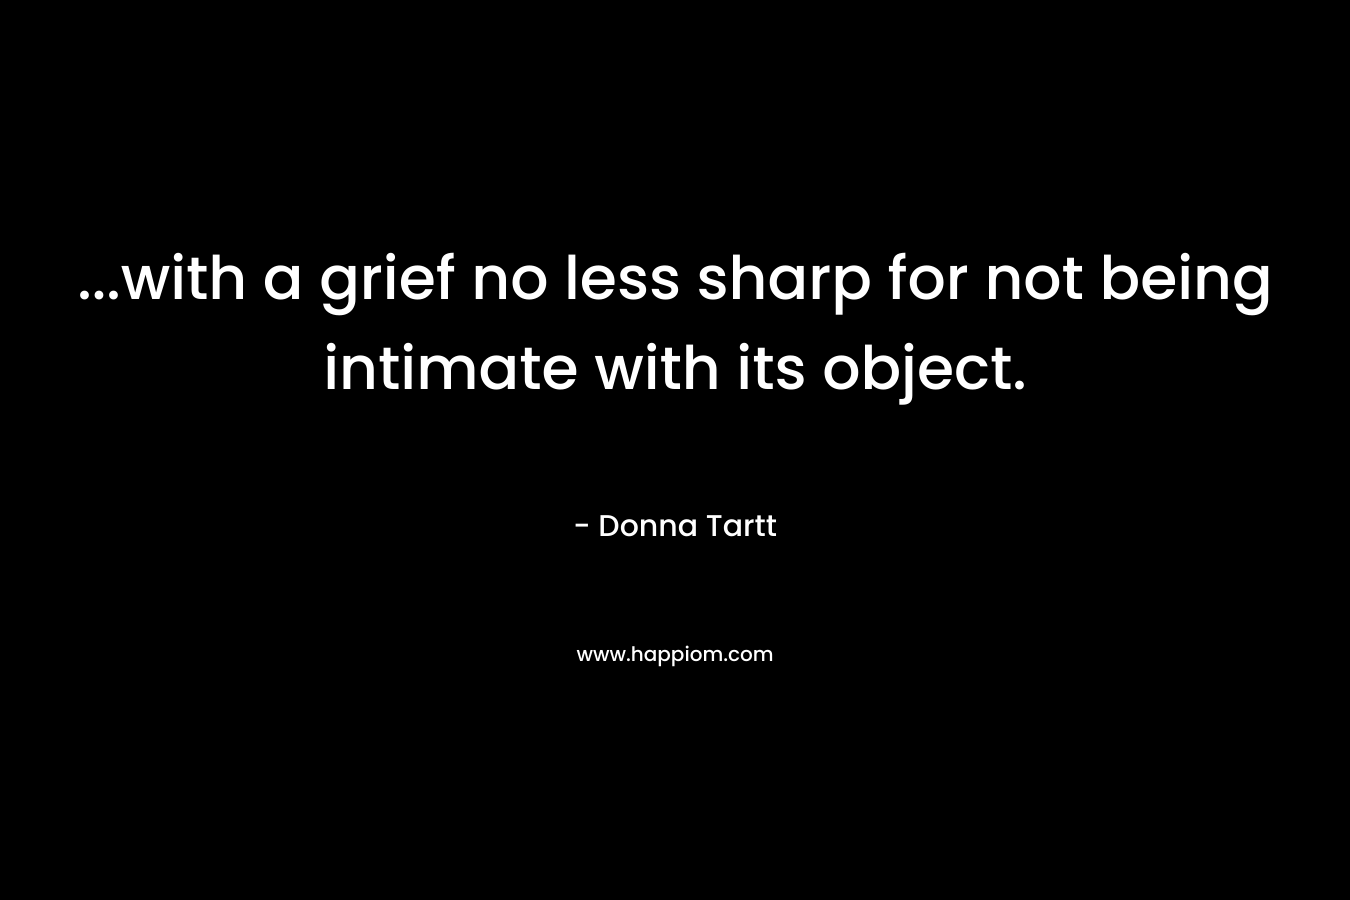 ...with a grief no less sharp for not being intimate with its object.